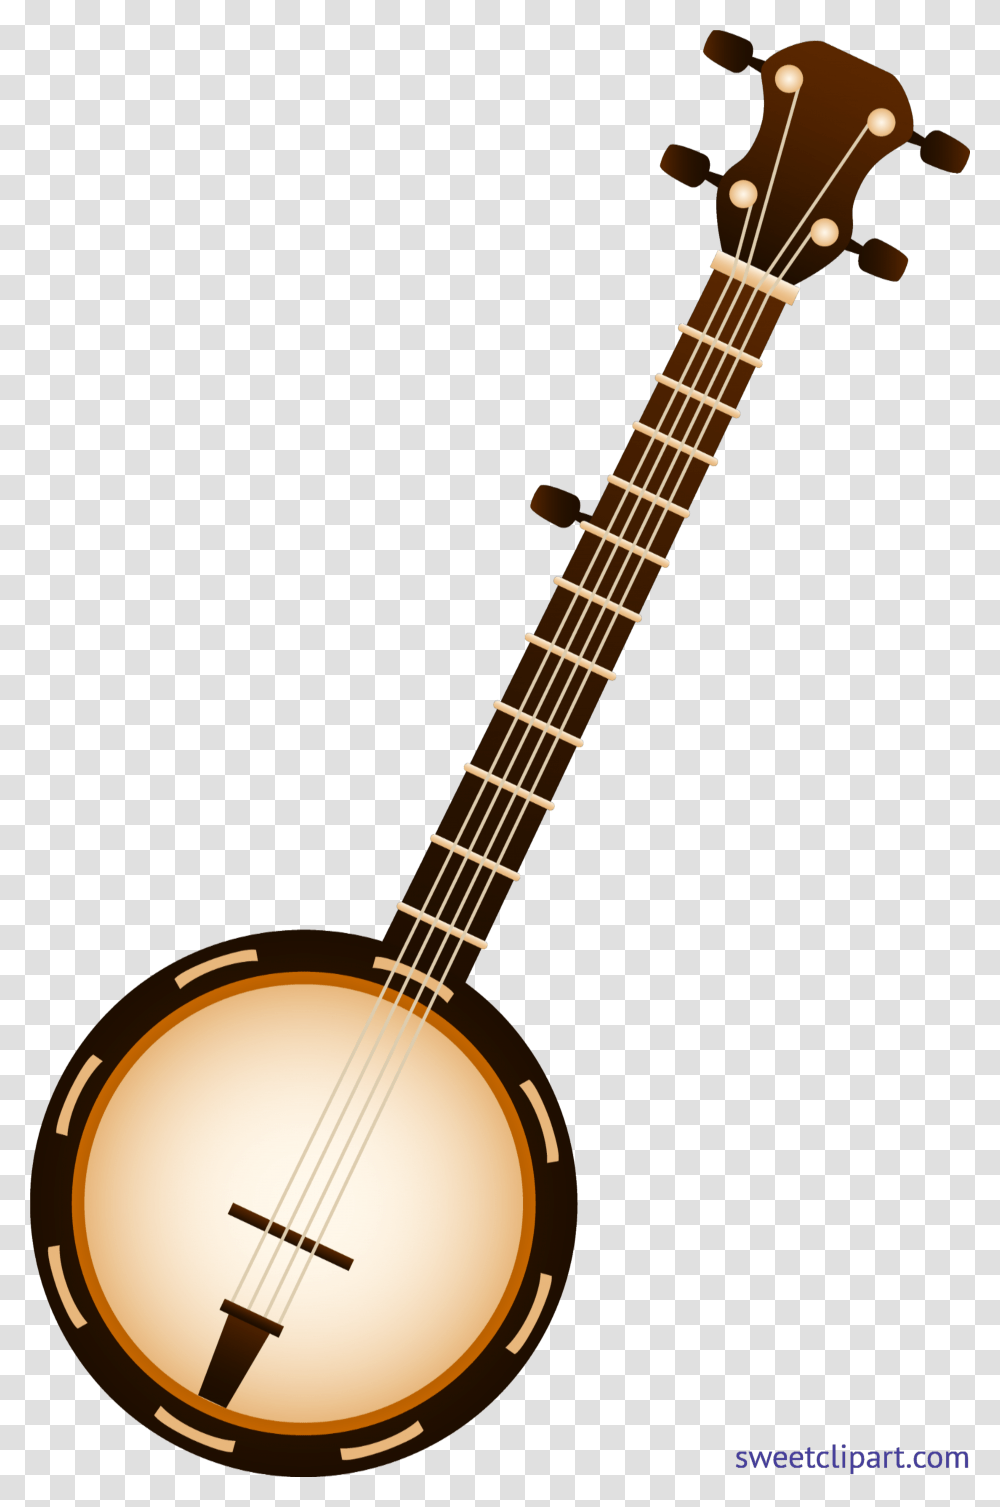 Banjo Vector Clipart Banjo Country Music Instruments, Leisure Activities, Musical Instrument, Guitar, Lute Transparent Png